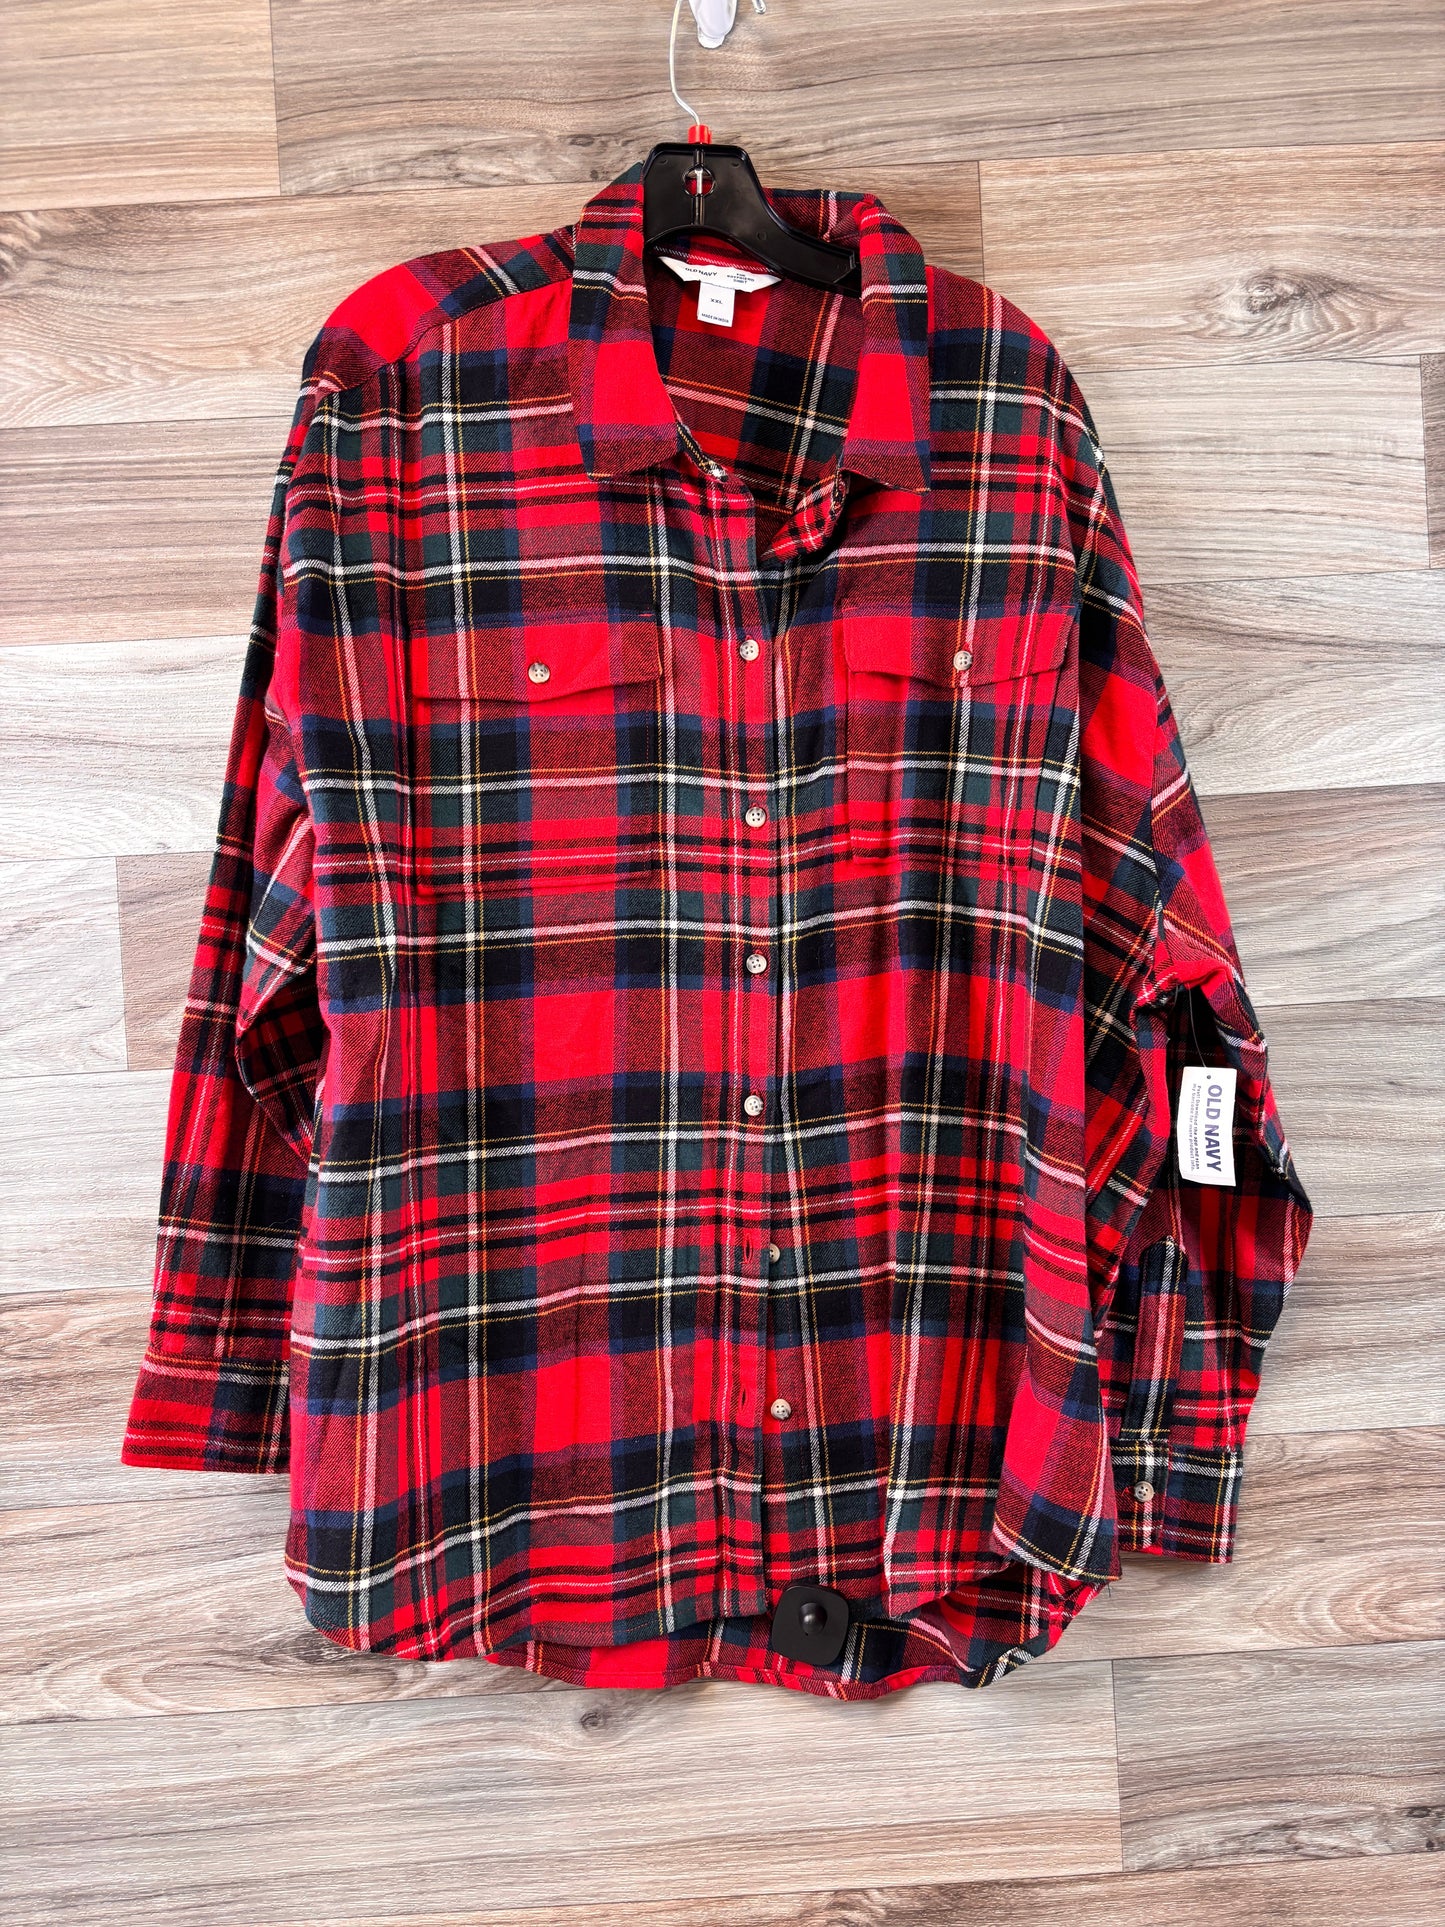 Plaid Pattern Top Long Sleeve Old Navy, Size Xxl